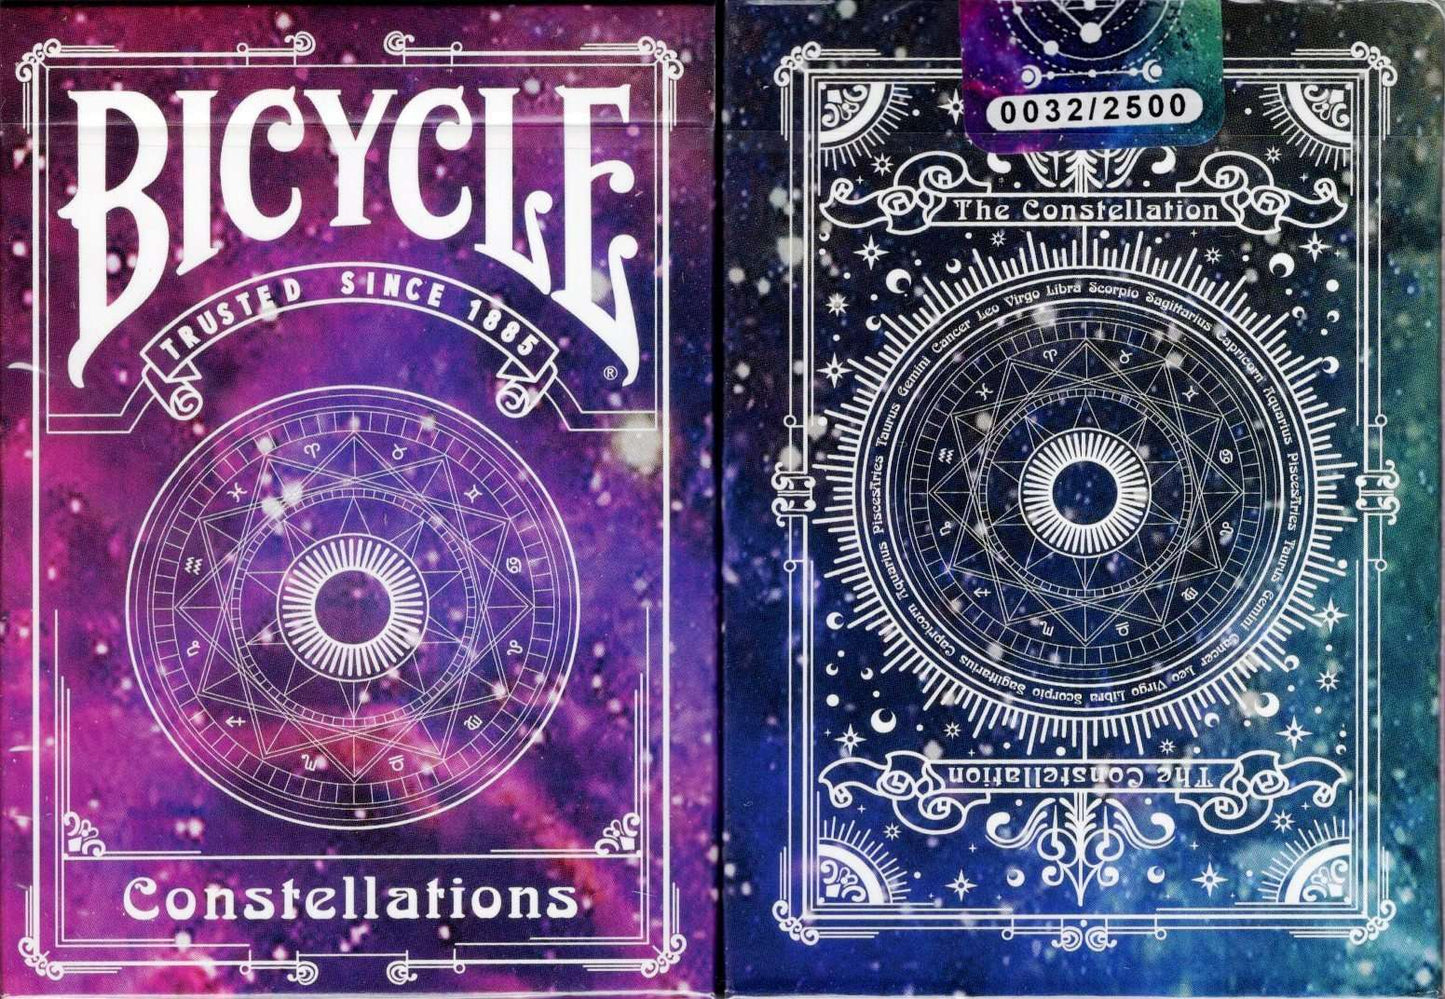 PlayingCardDecks.com-Constellations v2 Bicycle Playing Cards